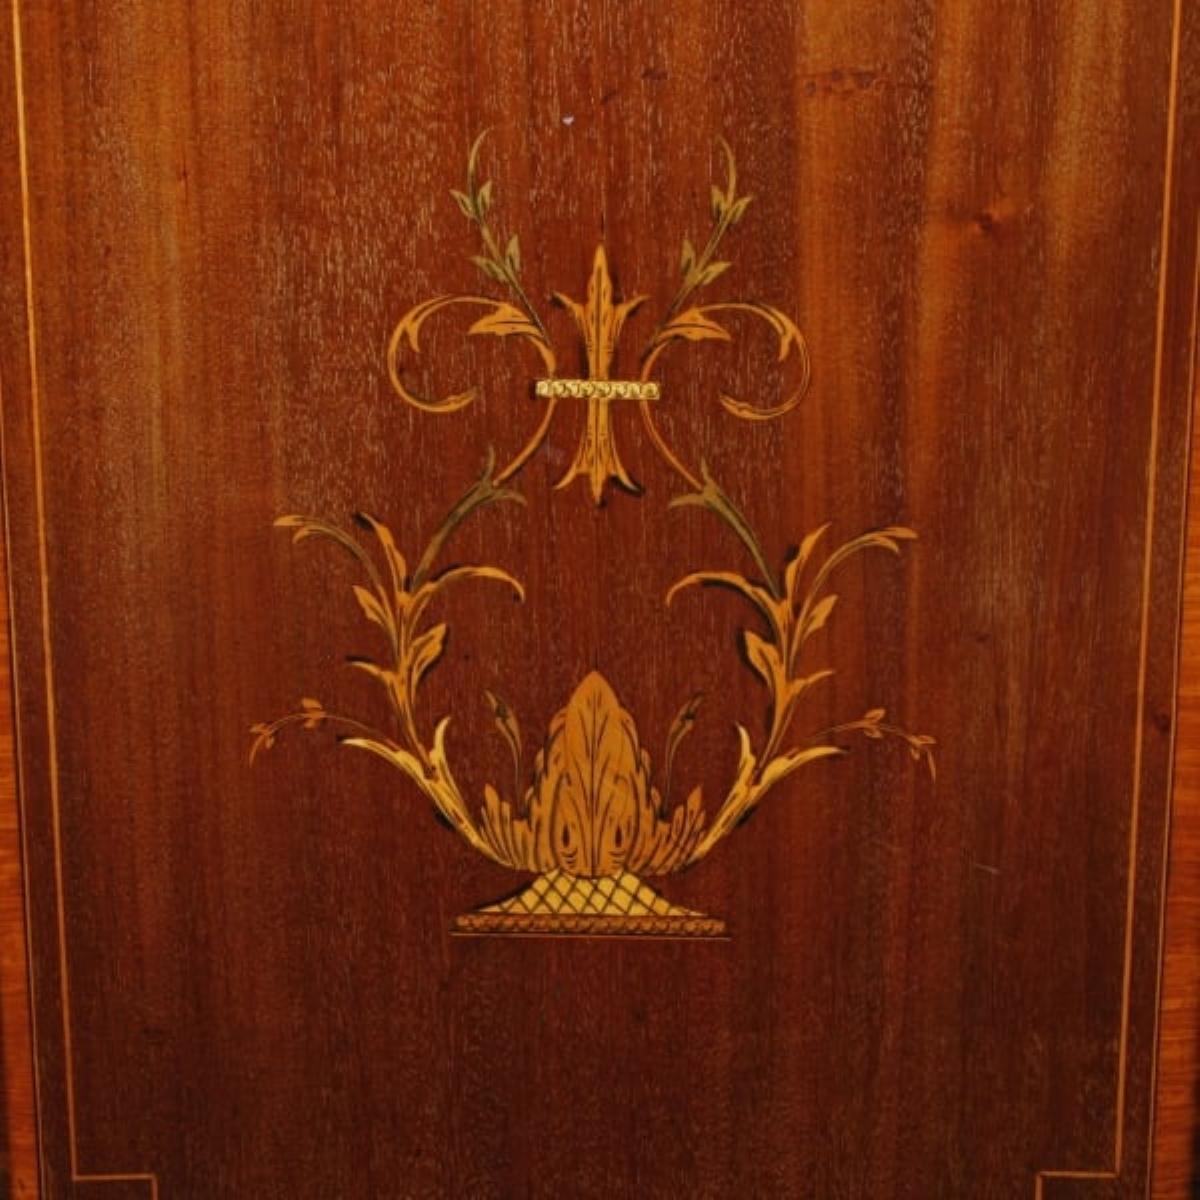 Edwardian Inlaid Double Corner Cabinet, Early 20th Century For Sale 3